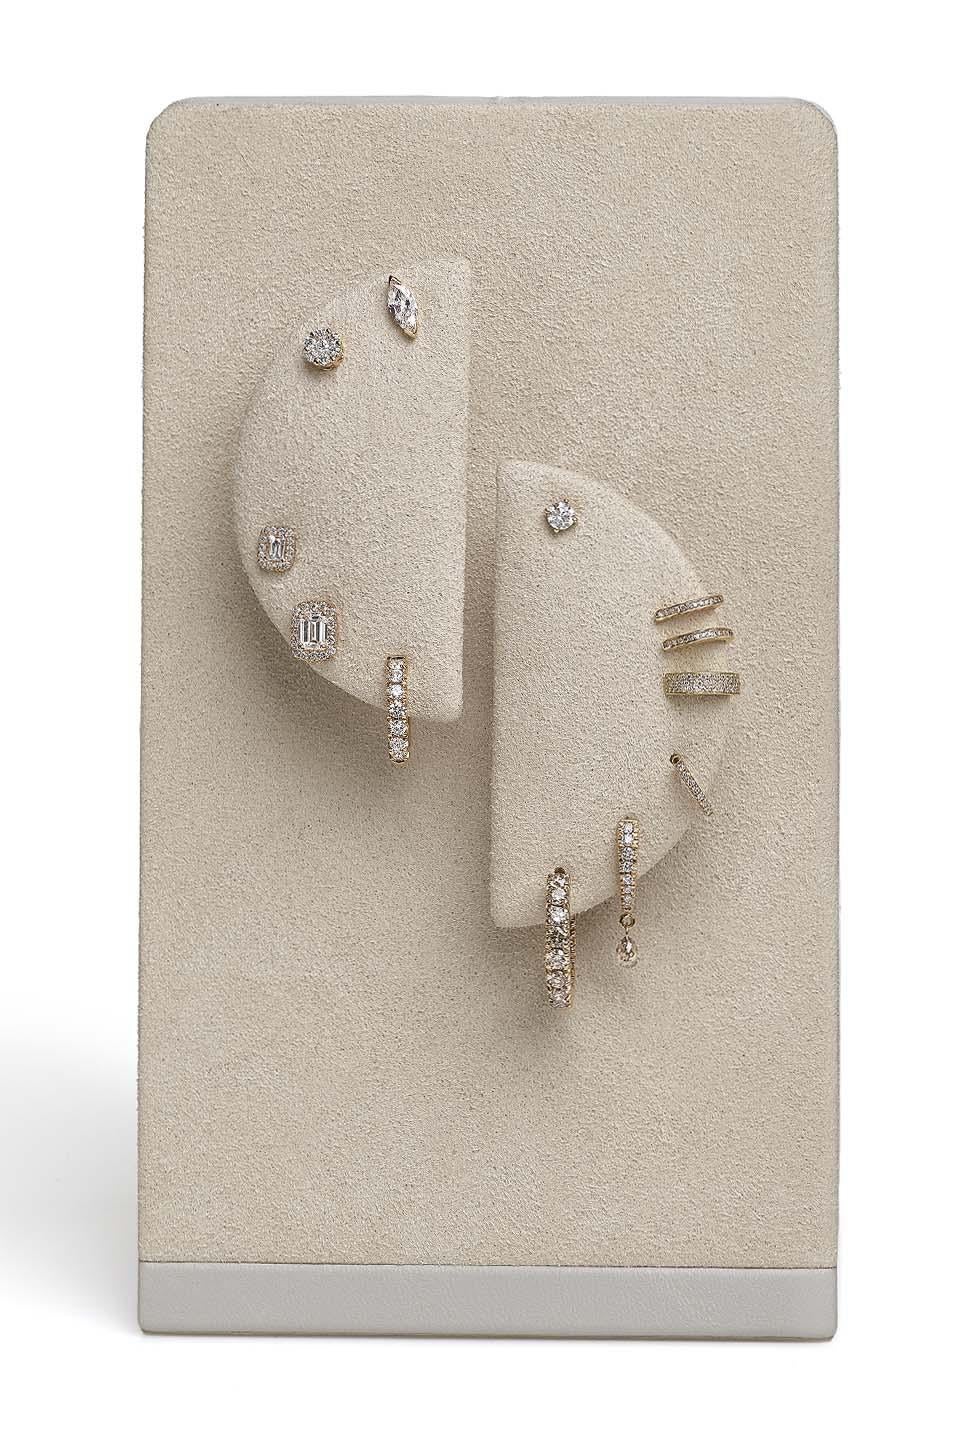 EEP Drops Cognac Earrings / Rose Gold. Earrings with drops cut cognac diamonds (0,98 ct.) and white brilliant cut diamonds (0,18 ct.) set in rose gold 18Kt. 
Precious and tiny earrings with cognac briolette cut diamonds for an everyday